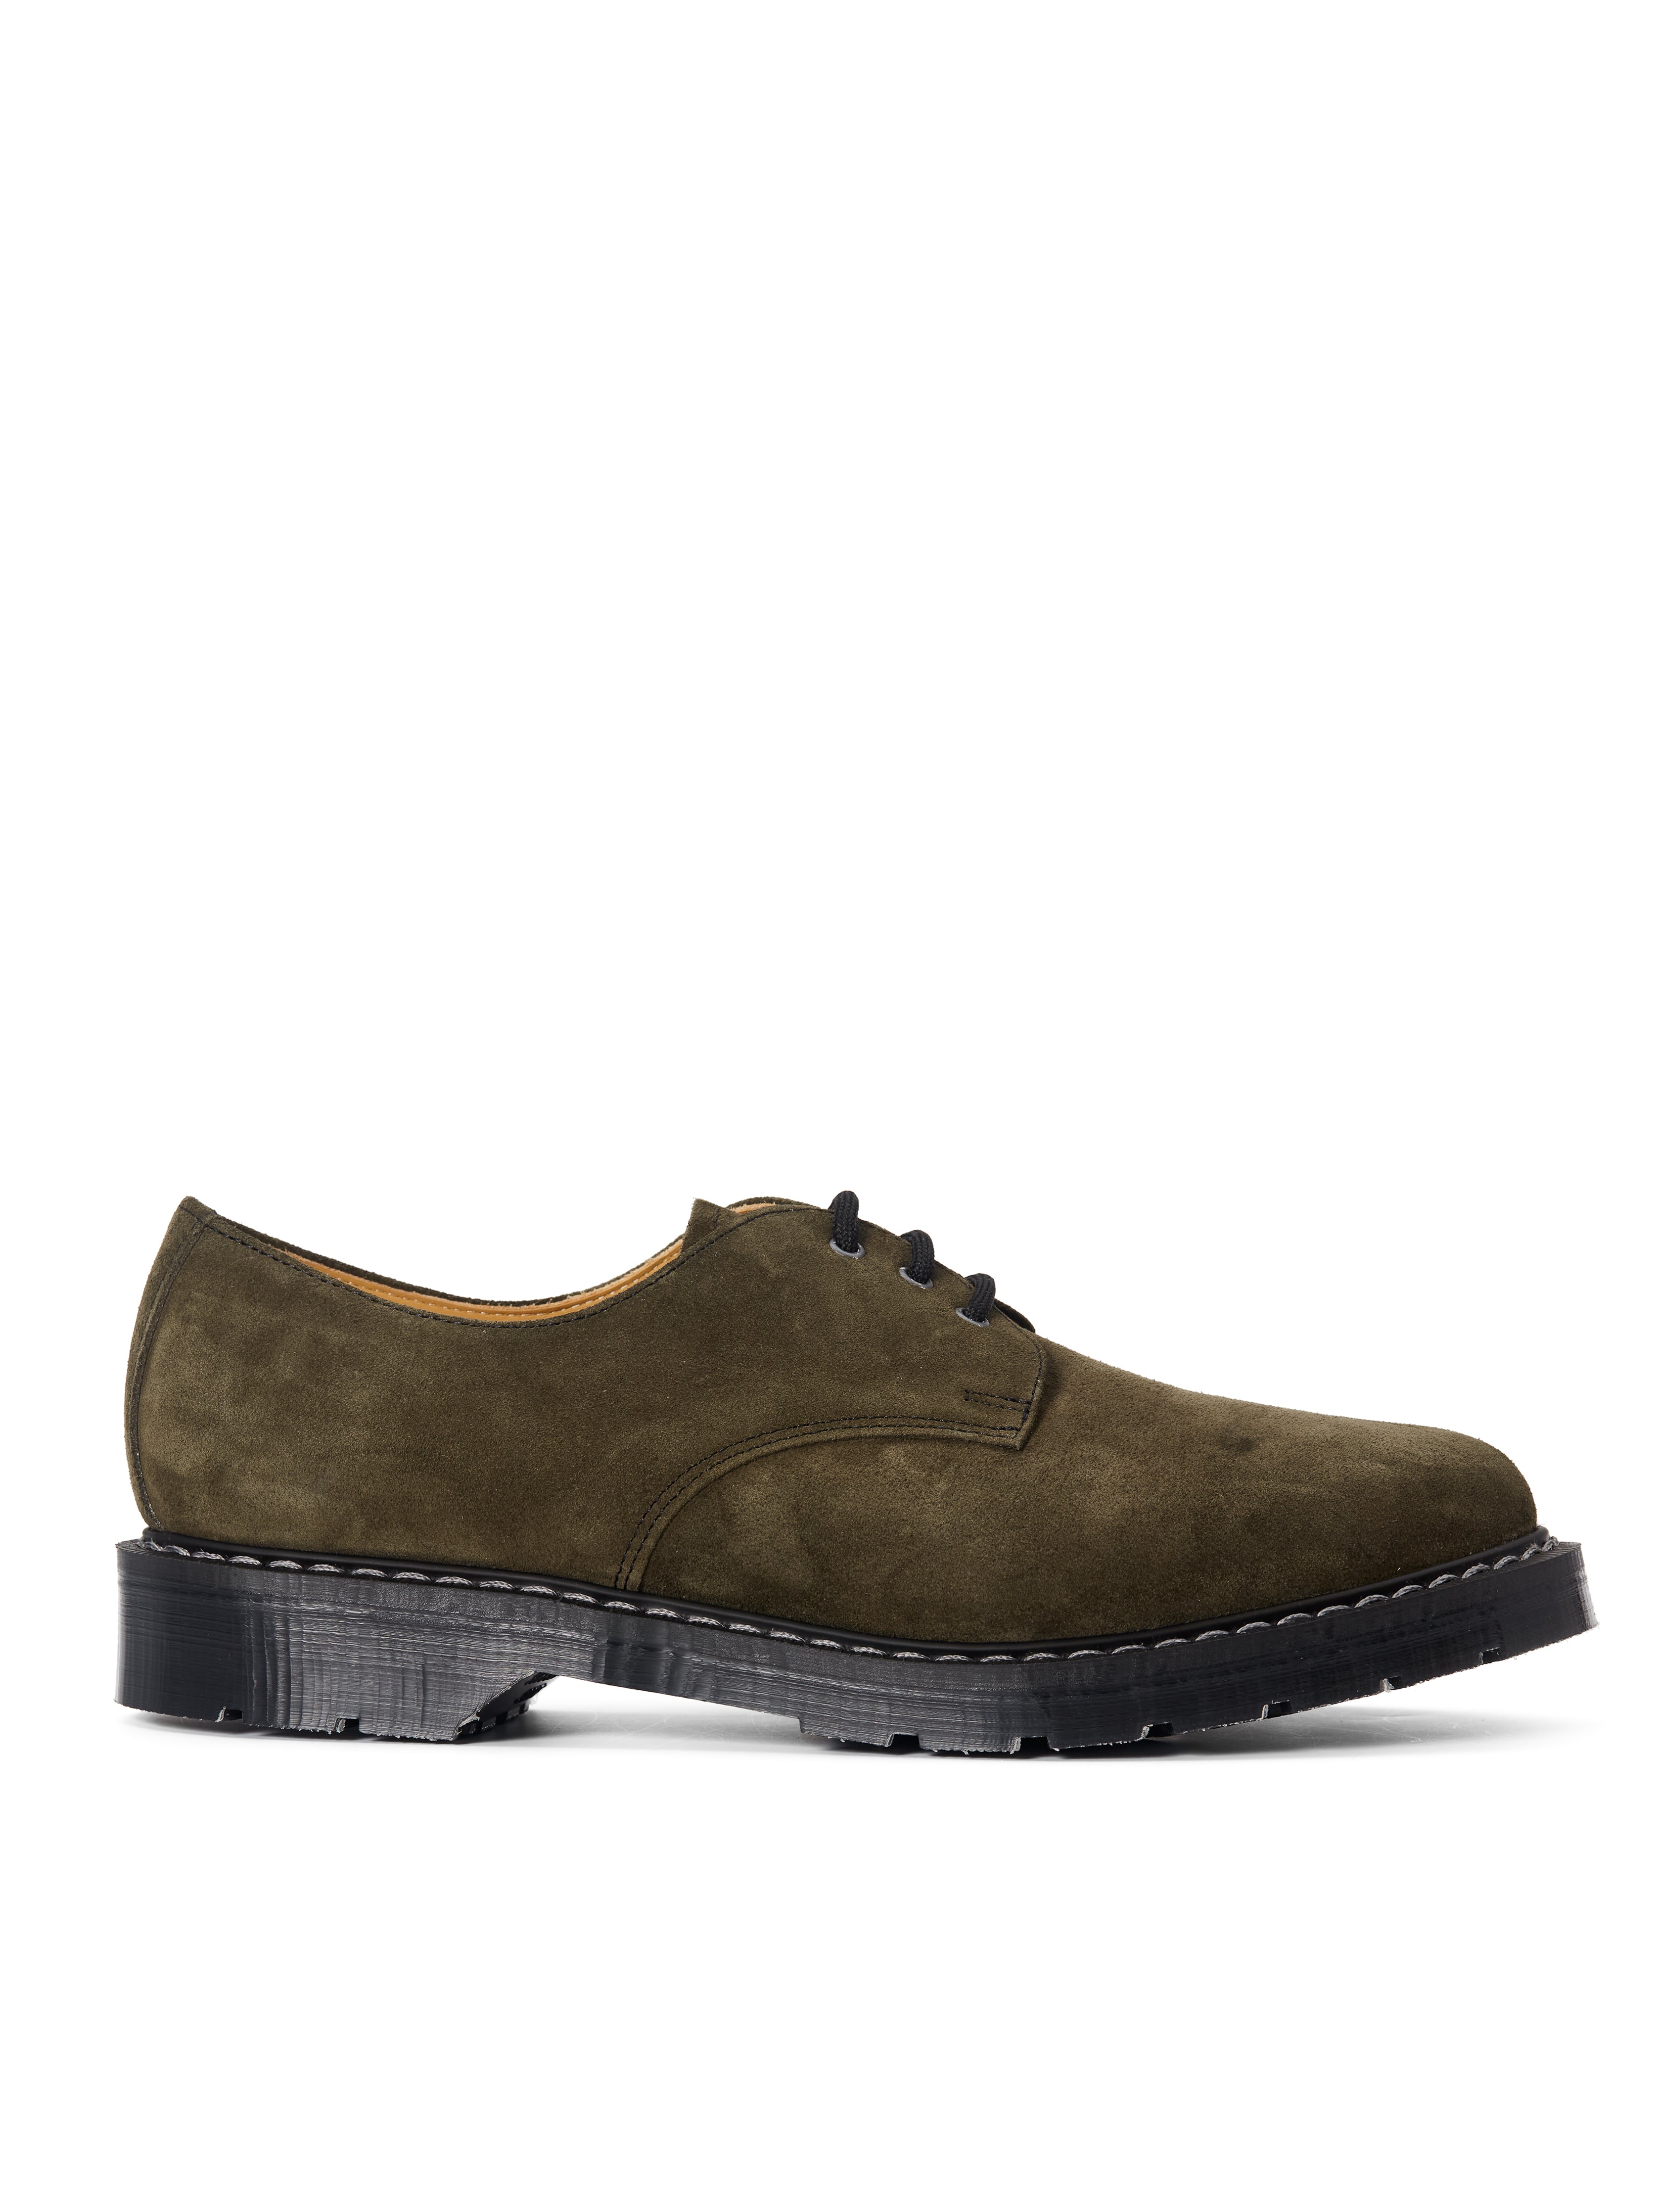 Solovair x Oliver Spencer Green Suede 3-eye Gibson Shoes